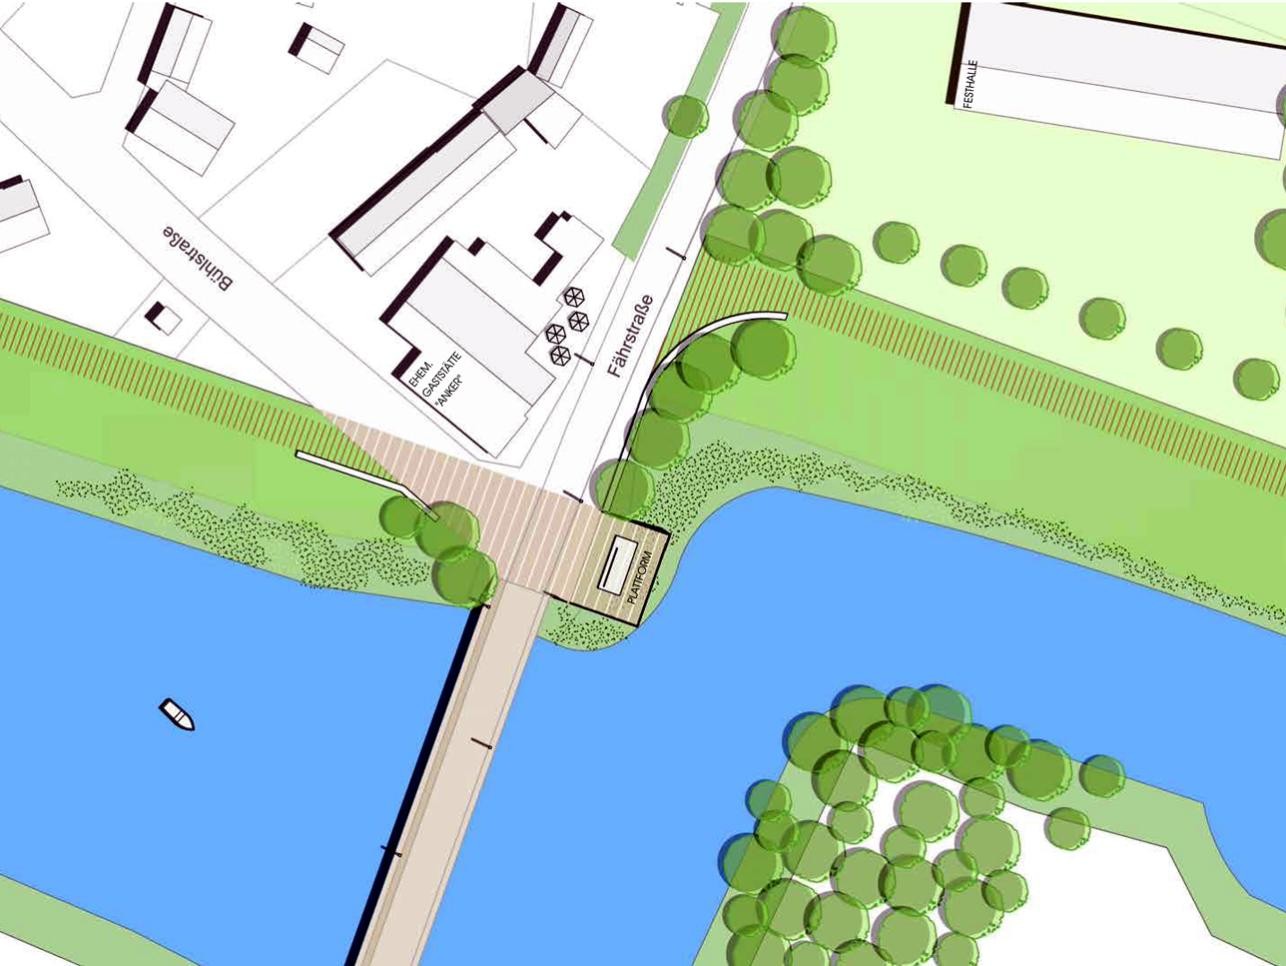 Graphic of the Plittersdorf Anchor Bridge and Fährstrasse with the Old Rhine, houses and trees